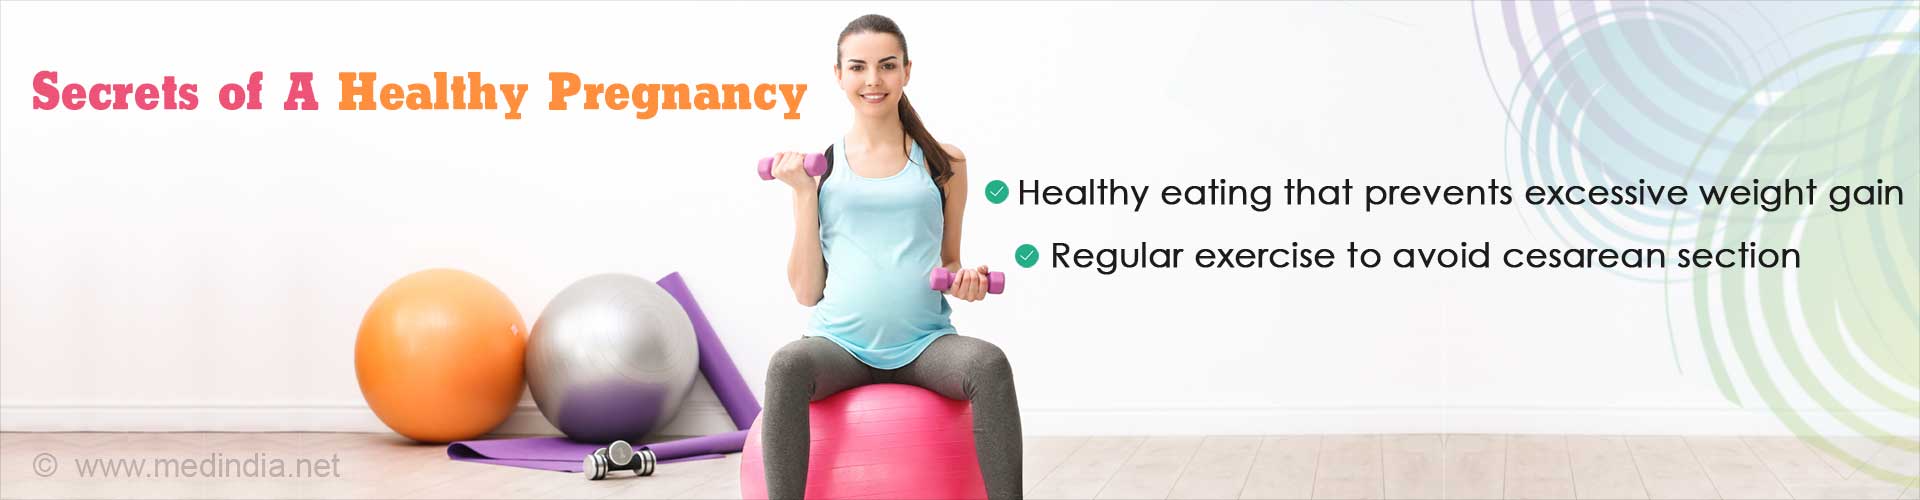 Secrets of A Healthy Pregnancy
- Healthy eating that prevents excessive weight gain
- Regular exercise to avoid Cesarean section